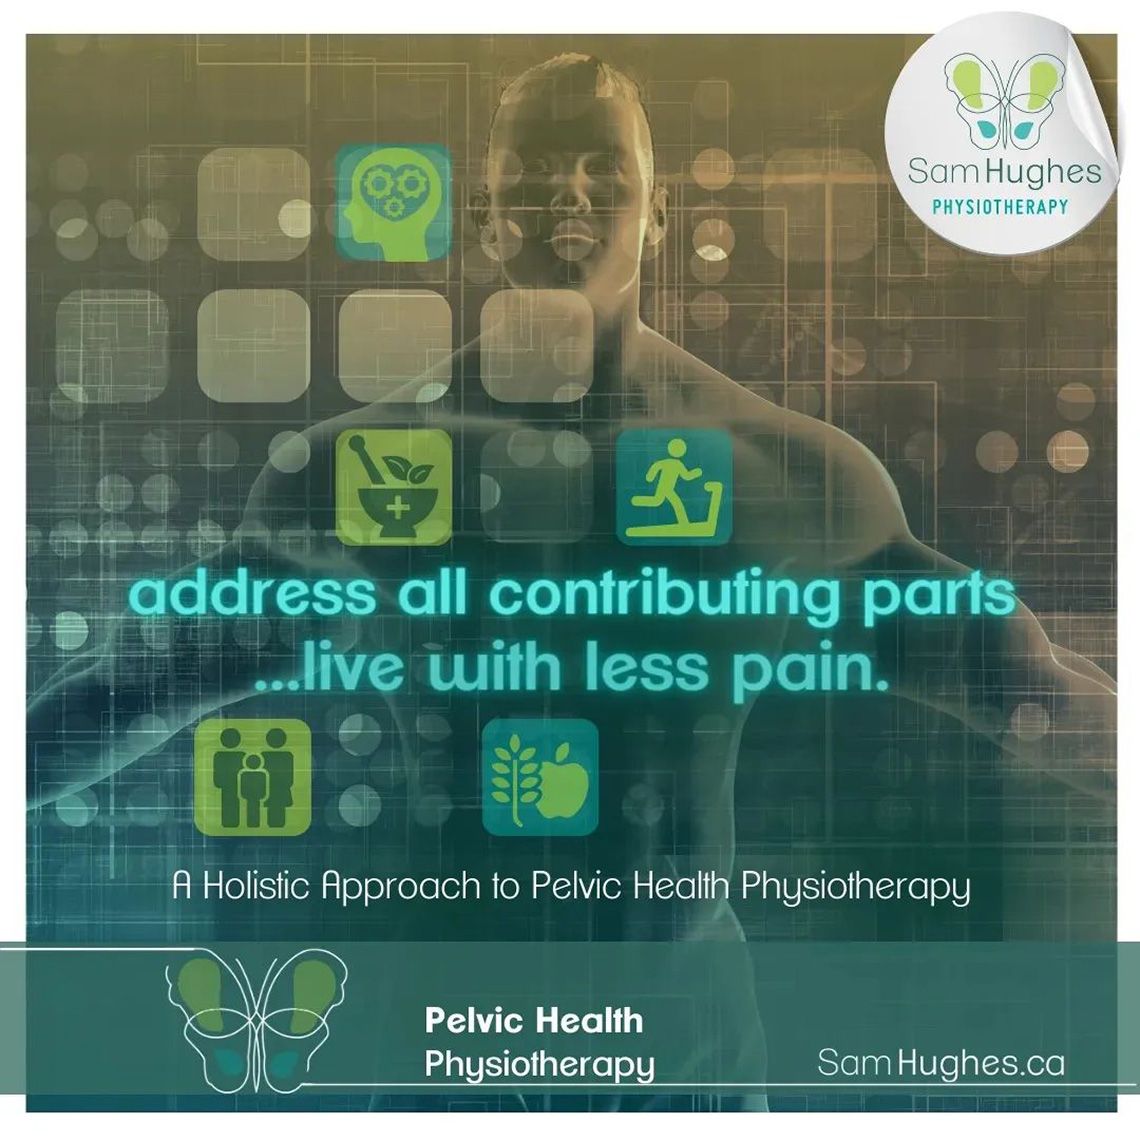 A holistic approach to pelvic health physiotherapy